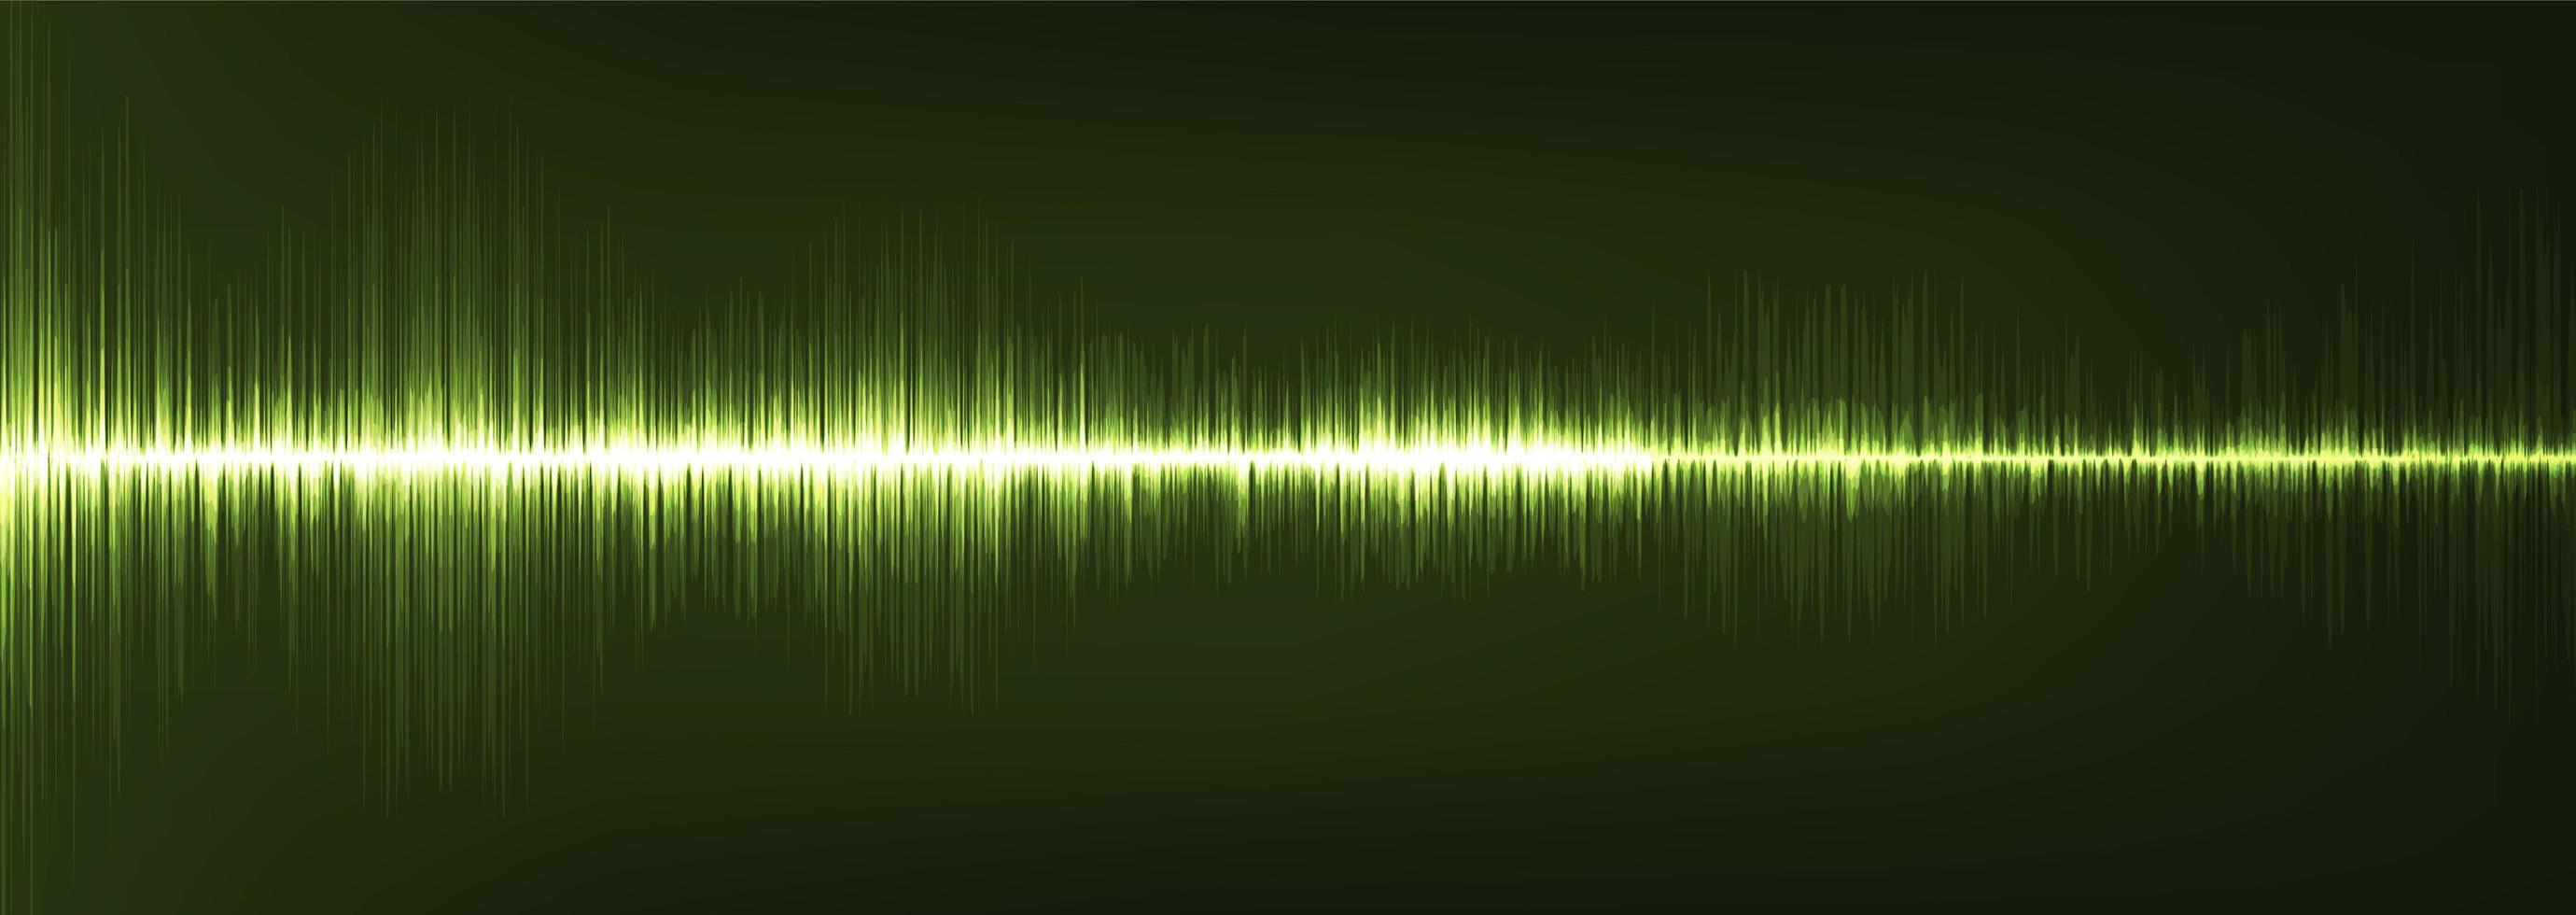 Panorama Green Digital Sound Wave Low and Hight richter scale vector